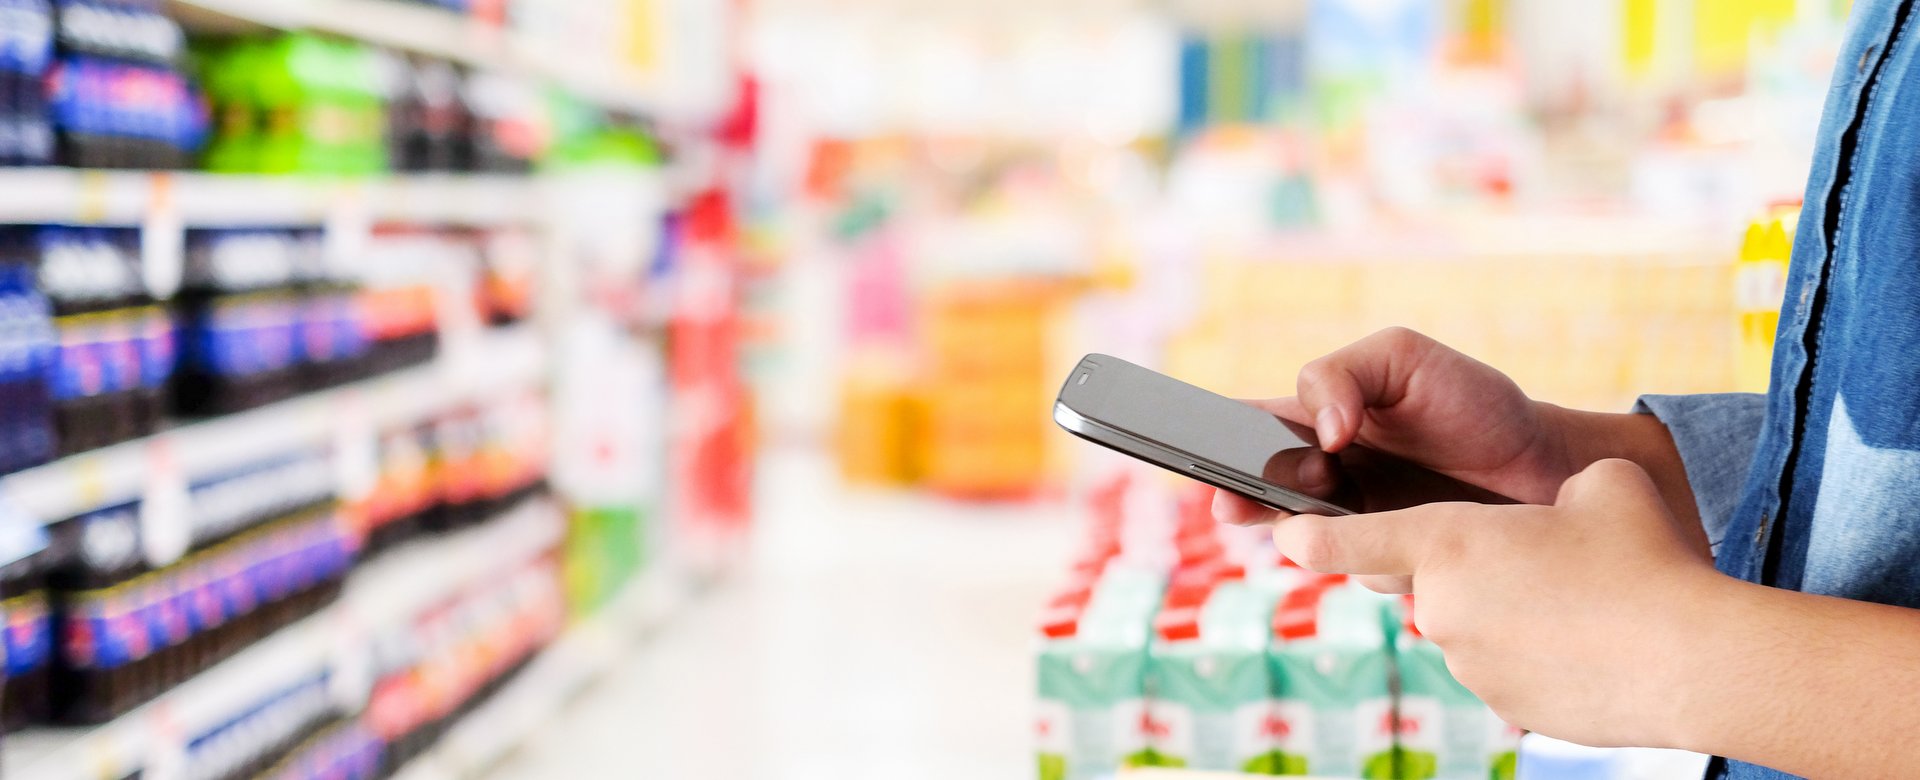 Influencing Digital CPG Shoppers